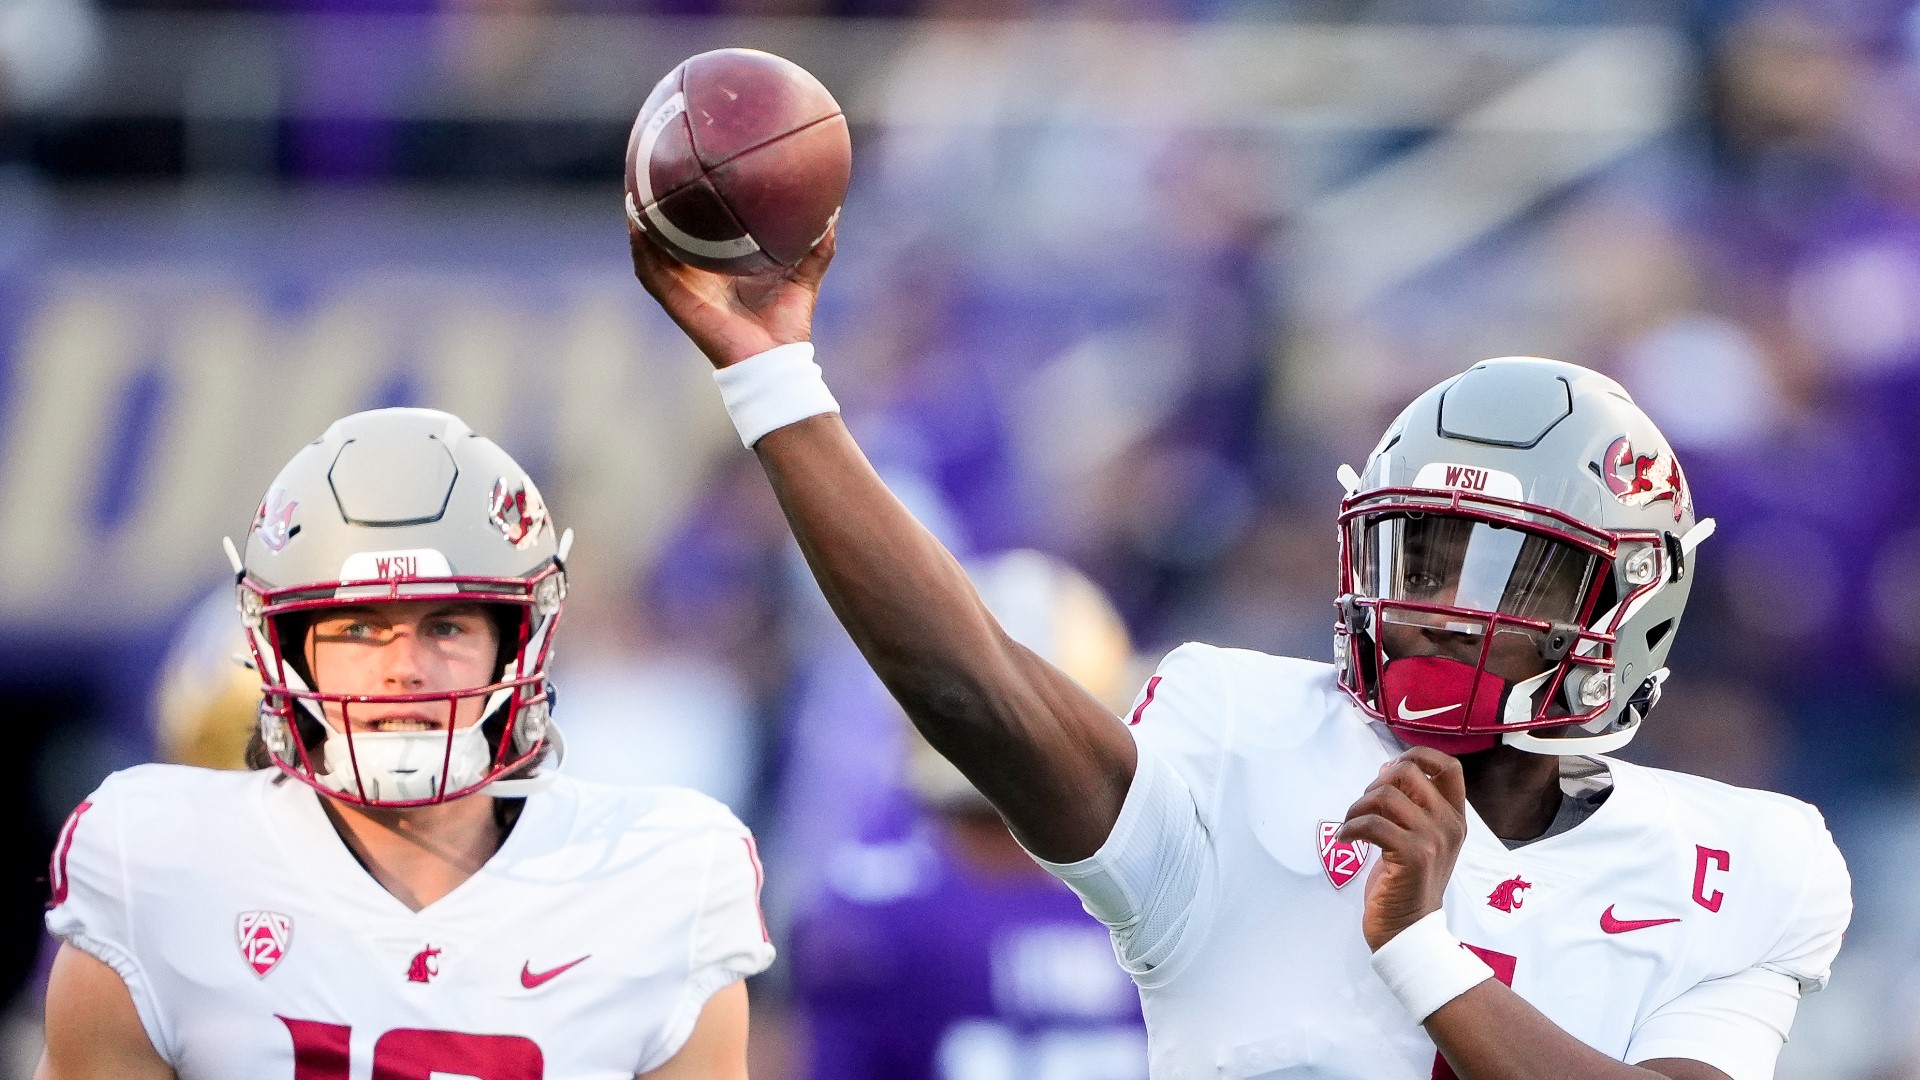 The University of Washington hit a field goal as time expired to beat Washington State University 24-21 and win the final Apple Cup of the Pac-12 era.